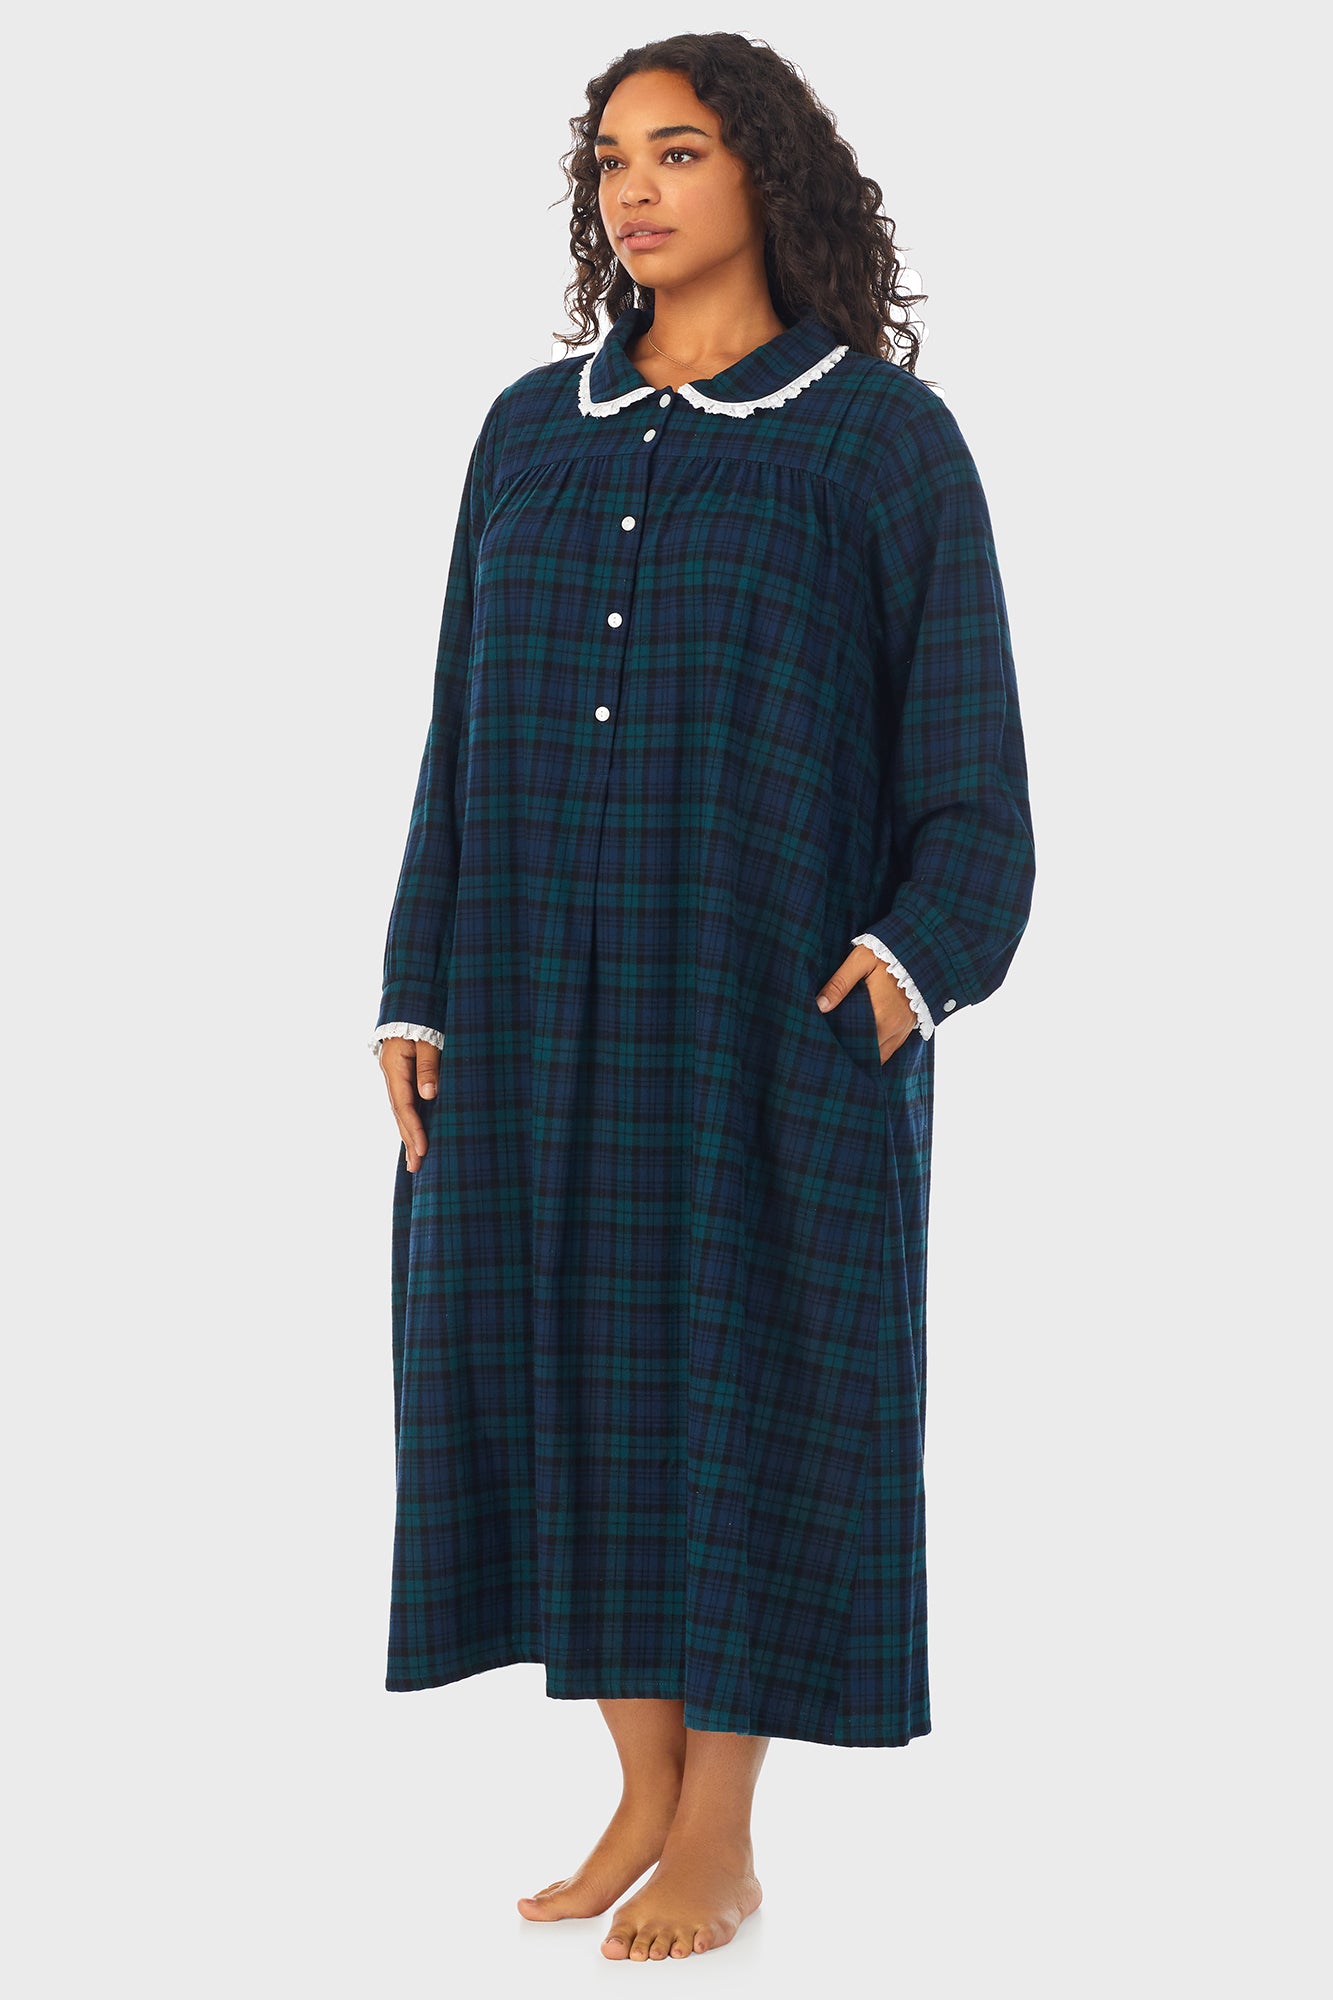  A lady wearing a long sleeve flannel gown plus with black watch peterpan pattern.